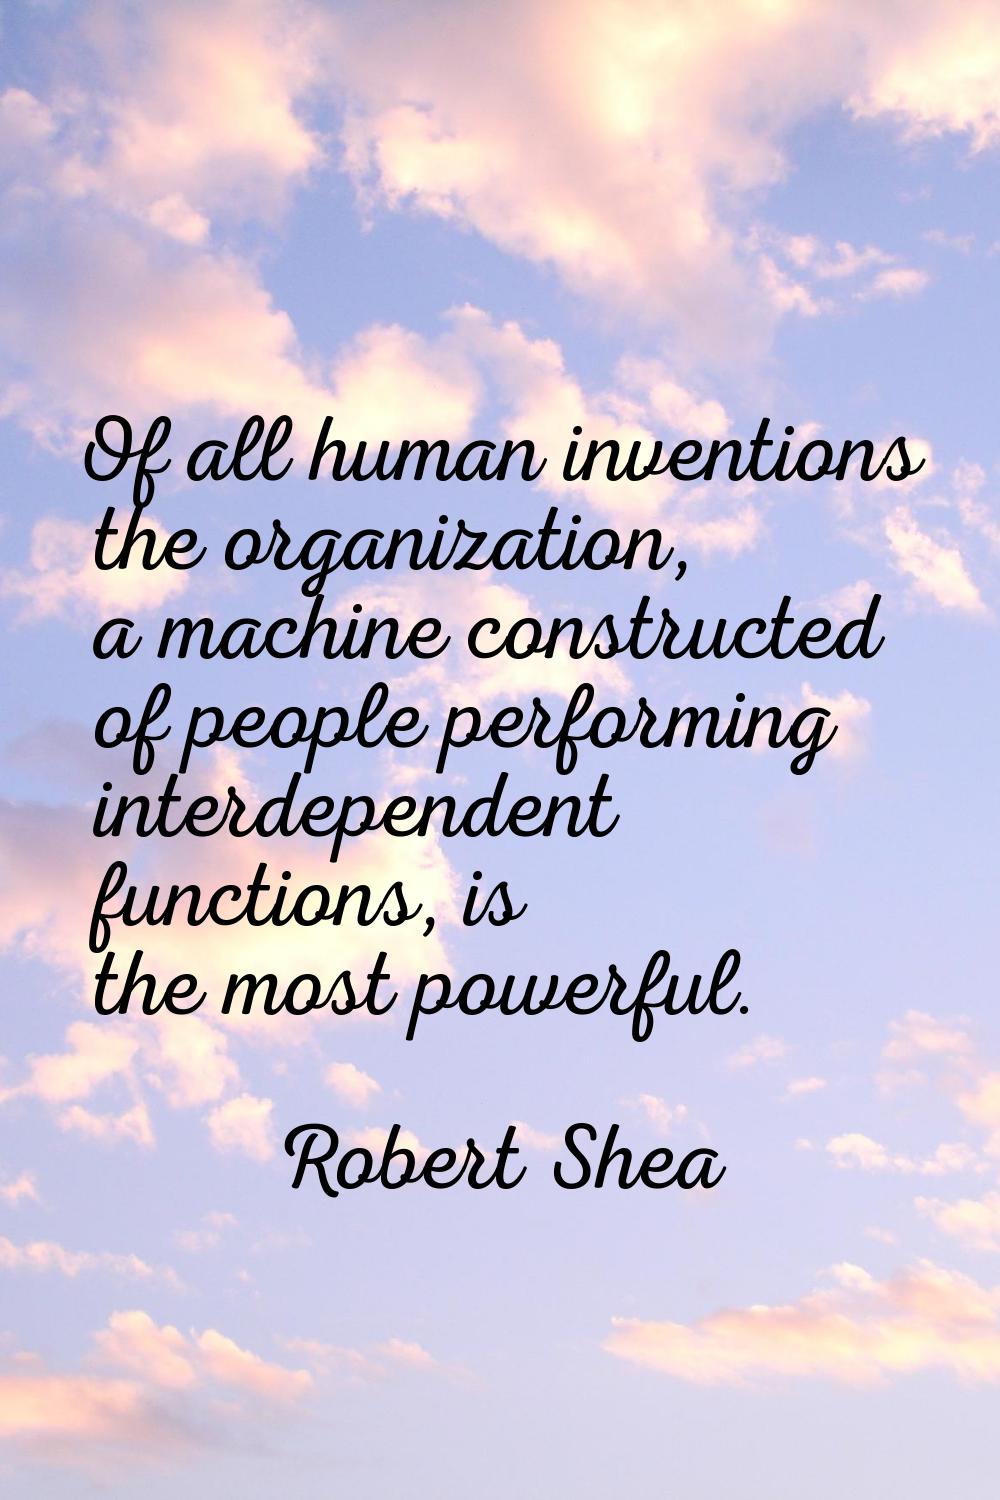 Of all human inventions the organization, a machine constructed of people performing interdependent